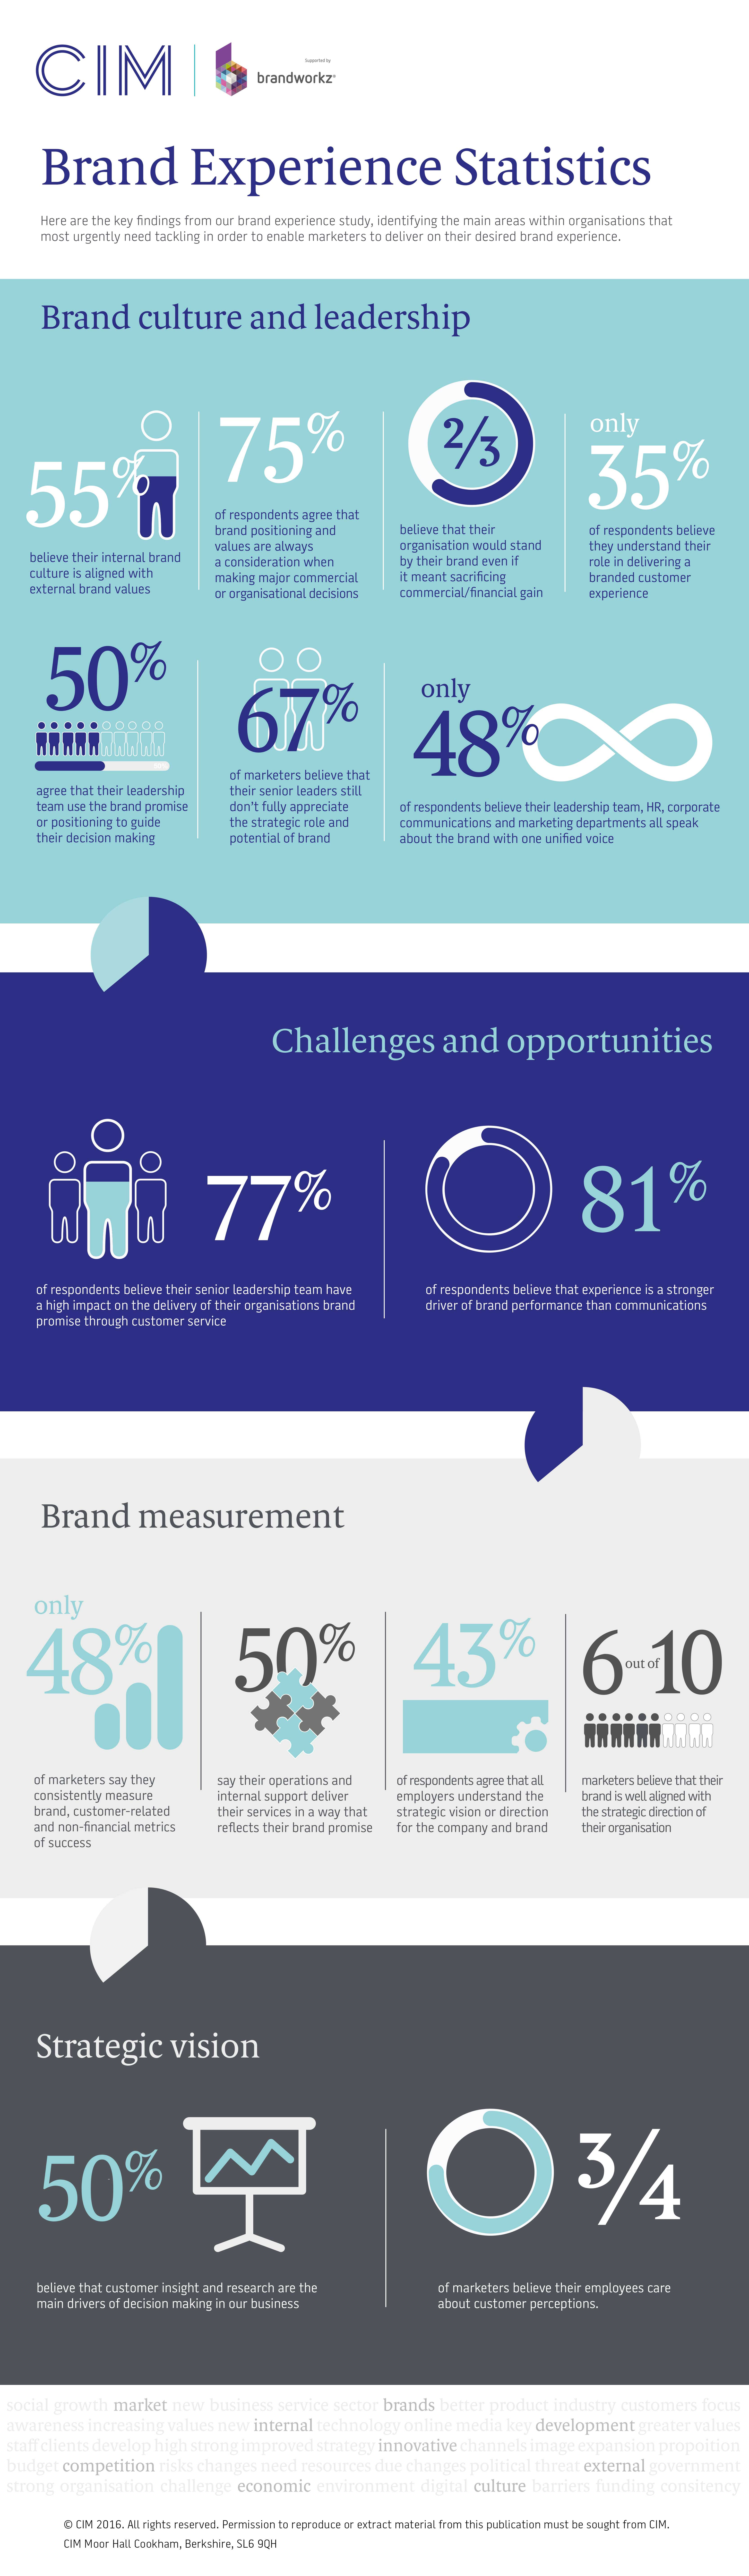 Brand Experience Research